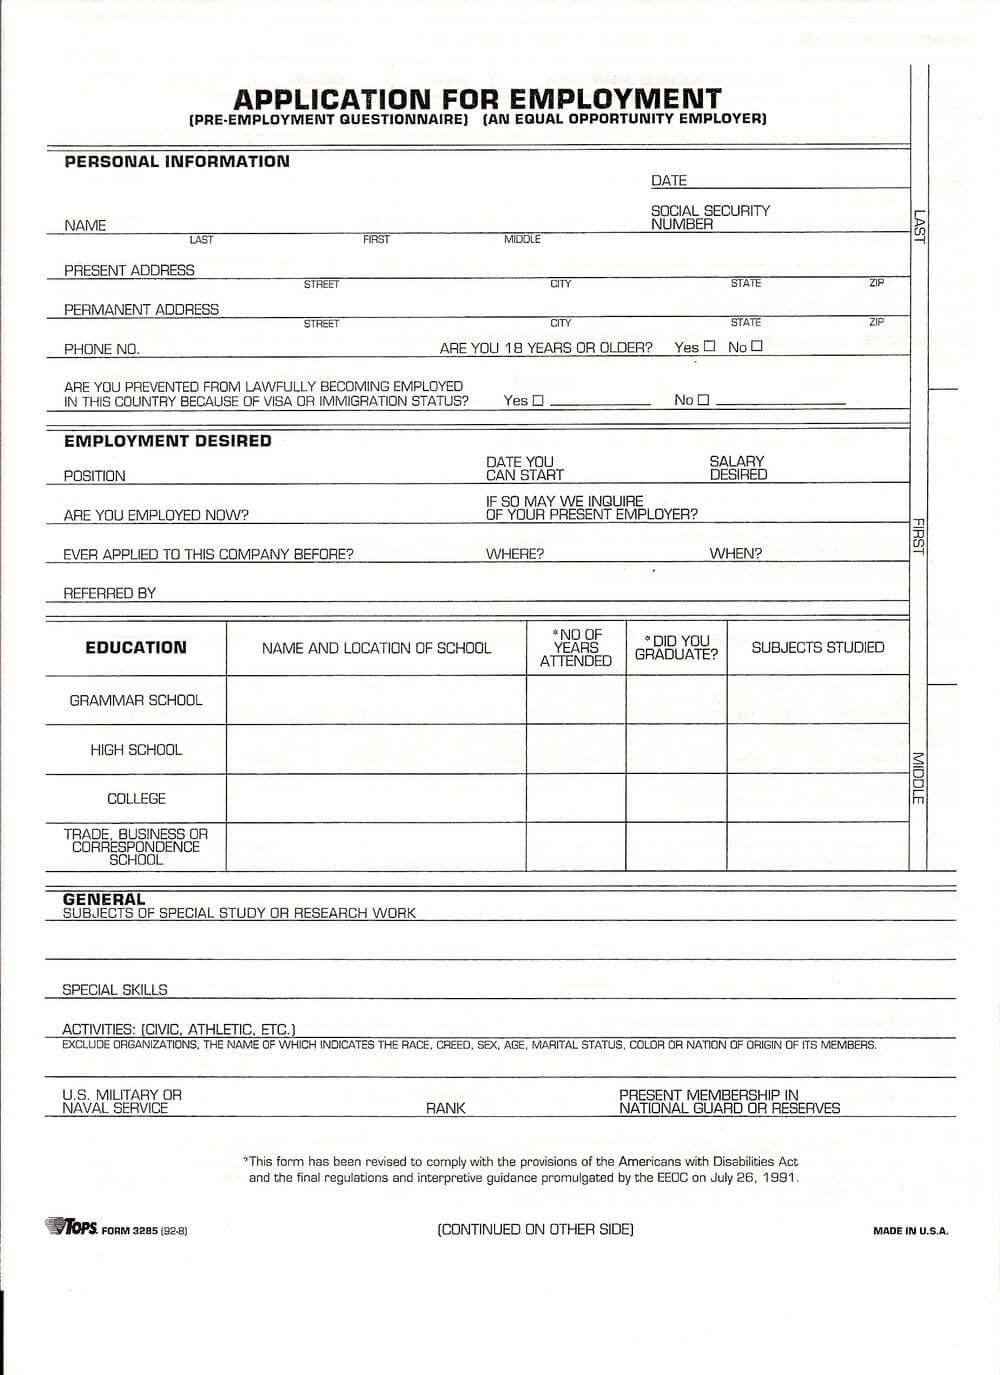 Free Job Application Form | Job Application Form, Job For Employment Application Template Microsoft Word